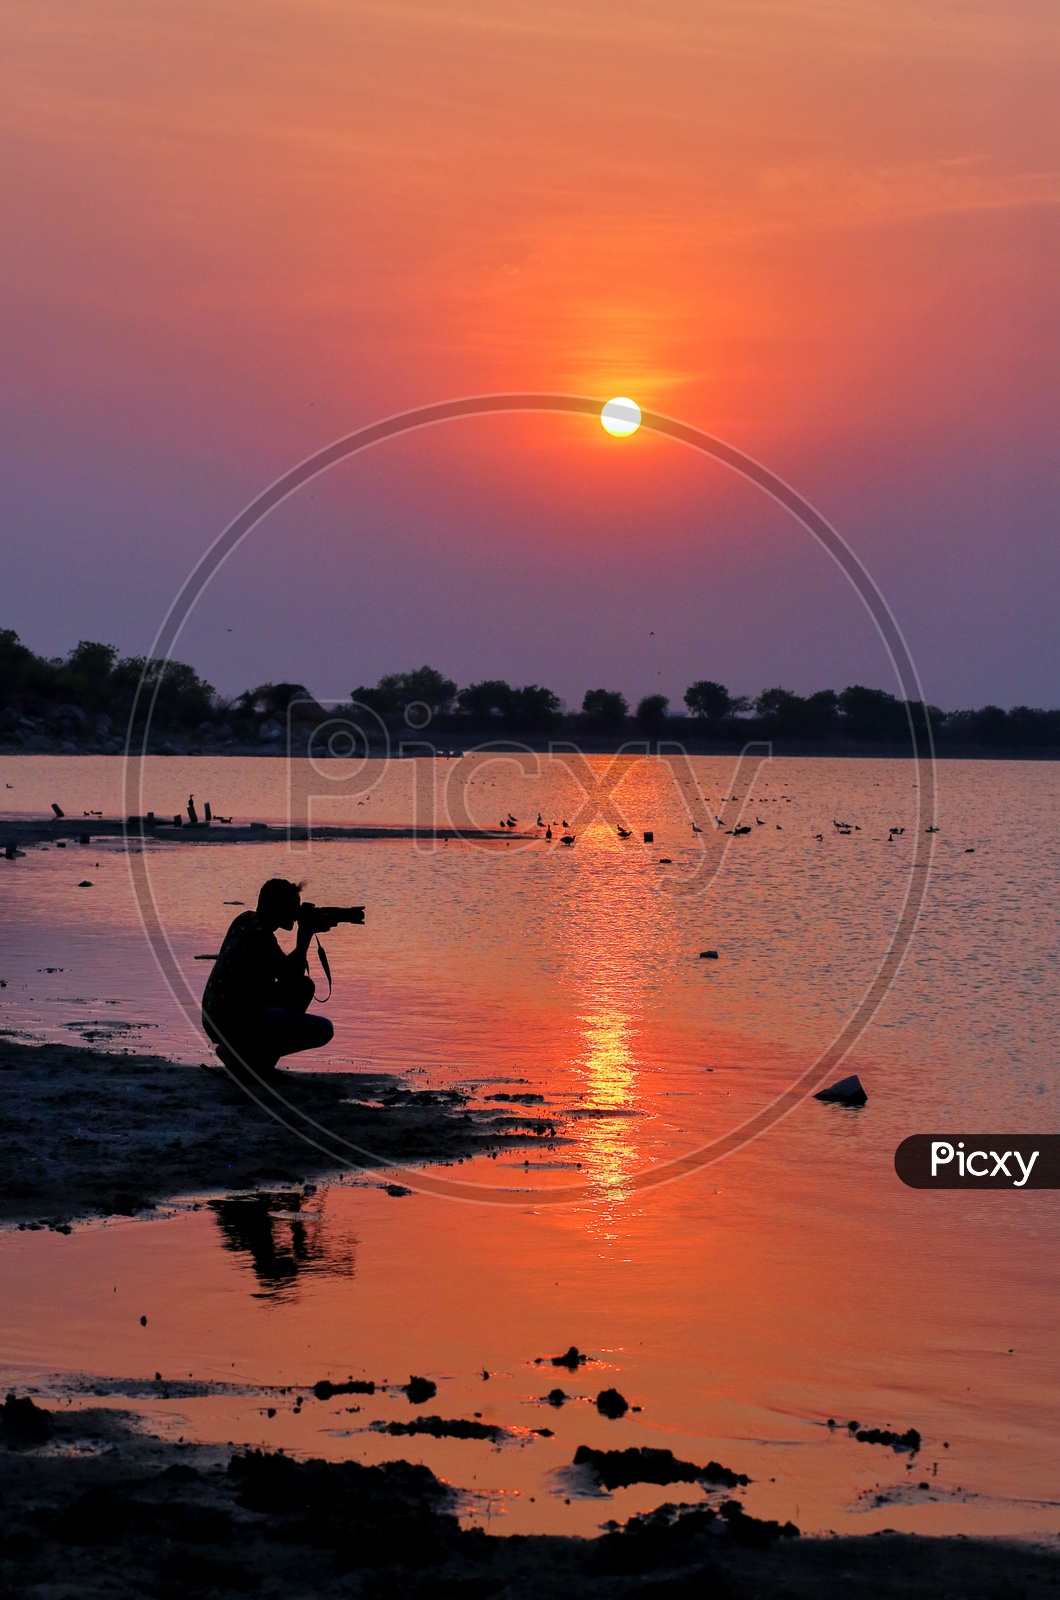 Silhouette Of a Photographer Shooting At Bank Of a Lake With Sunset Sky In Background